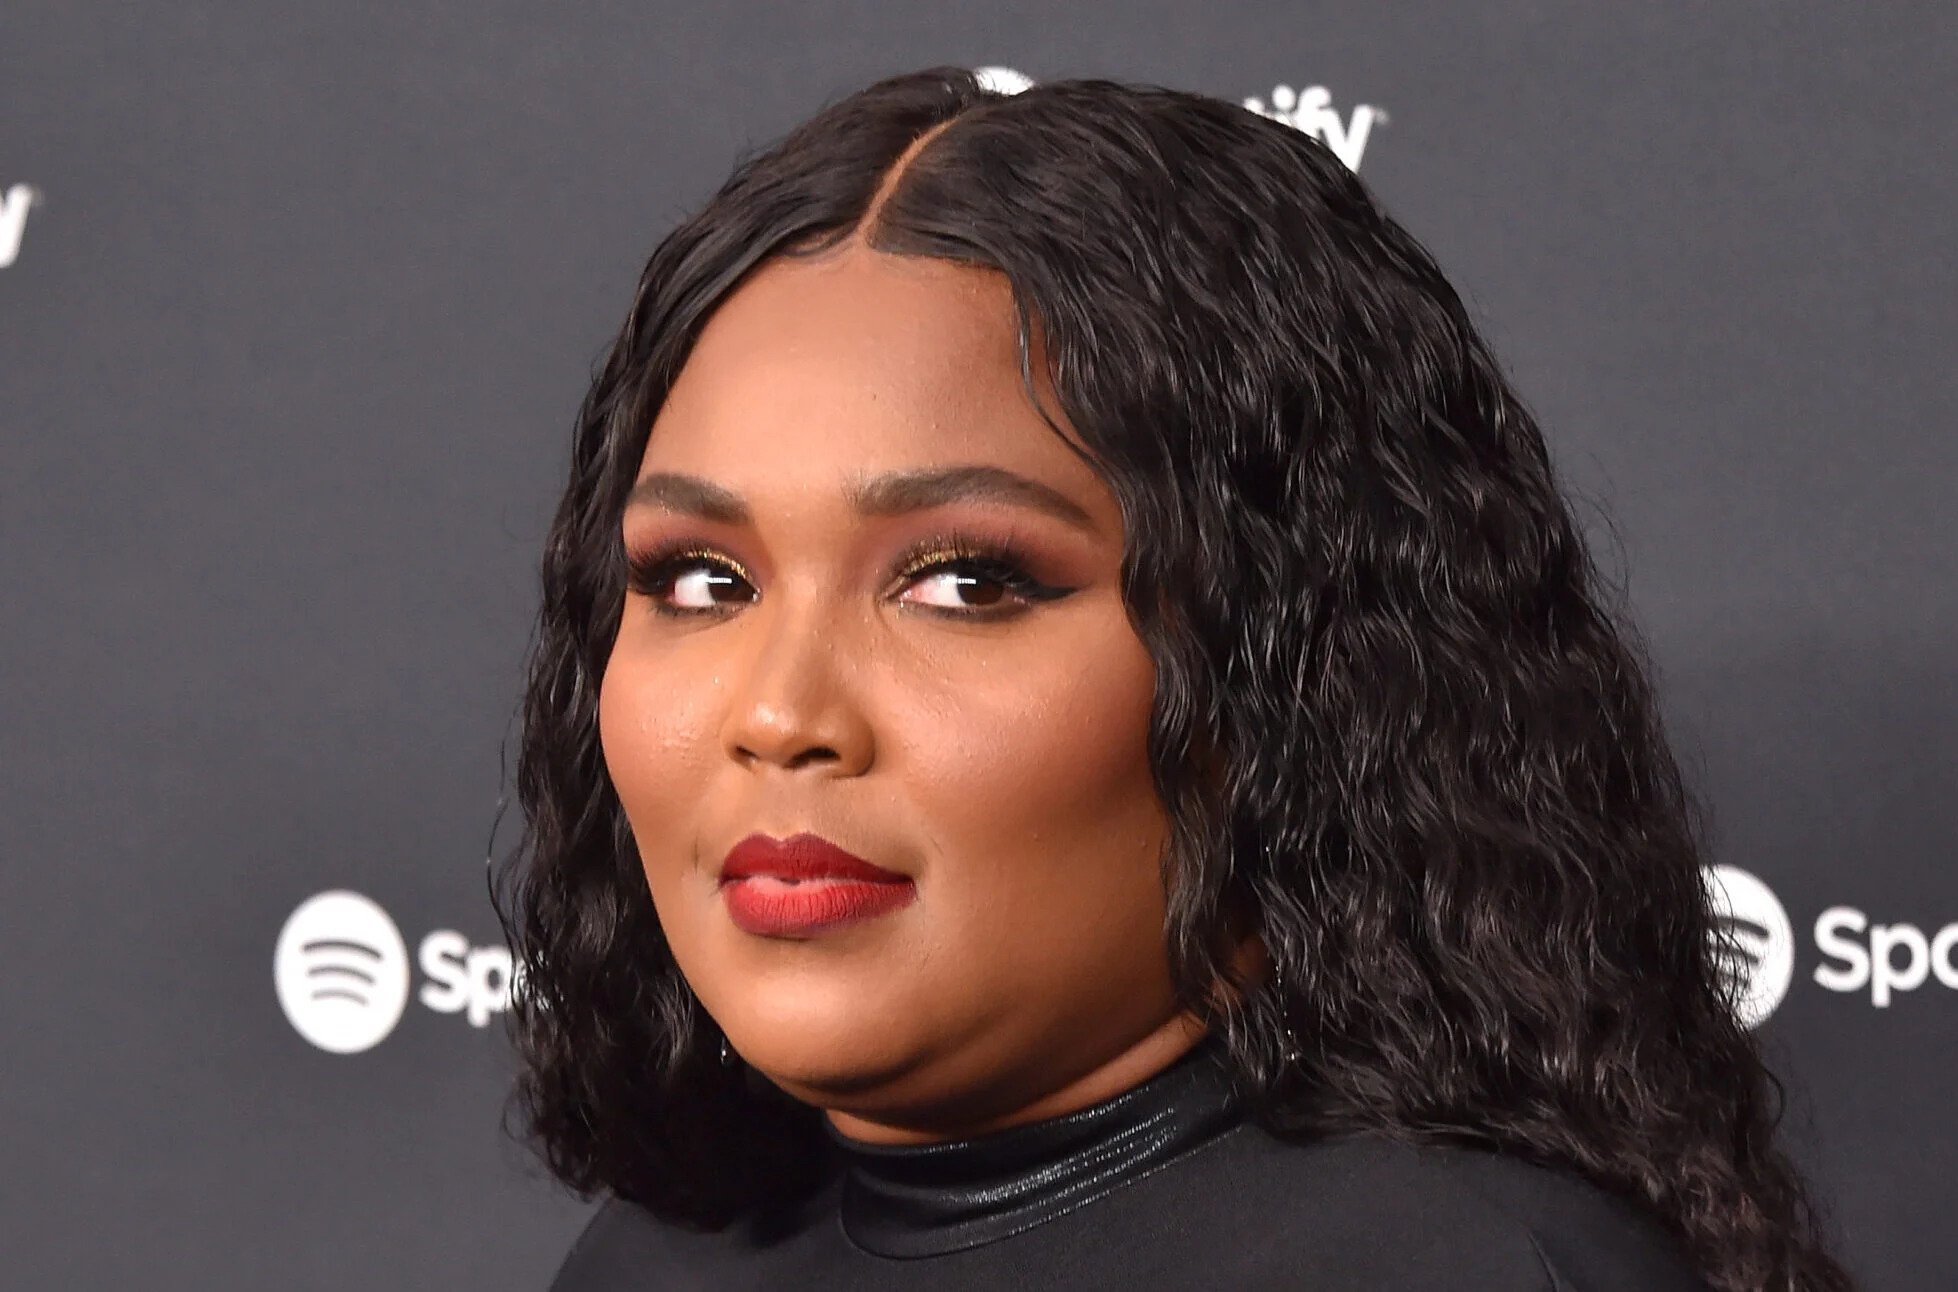 Lizzo after the weight loss